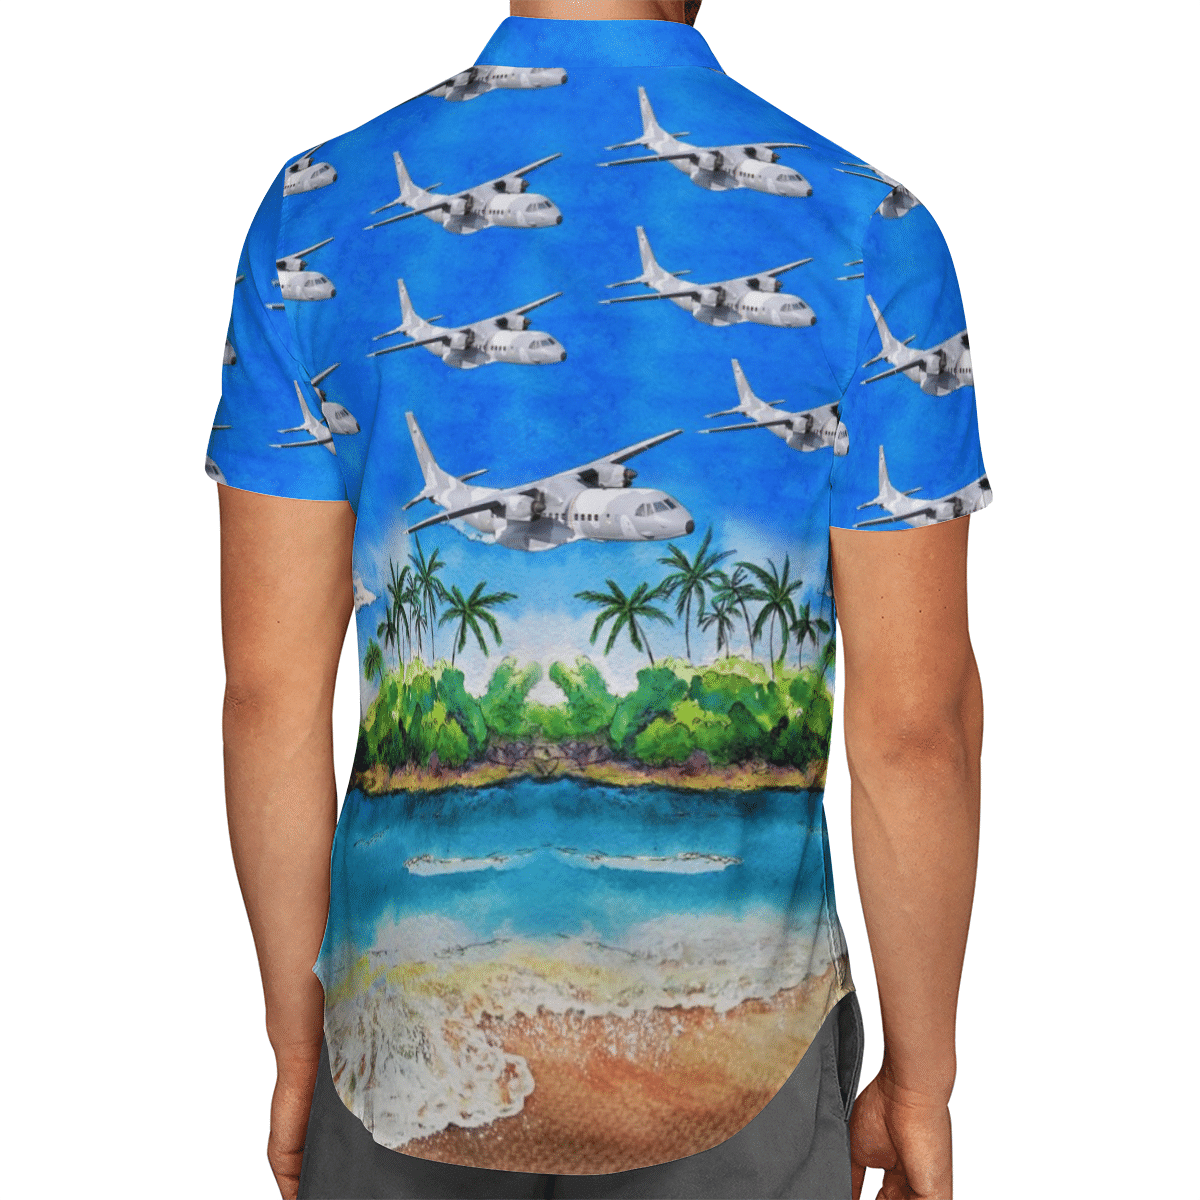 Going to the beach with a quality shirt 110